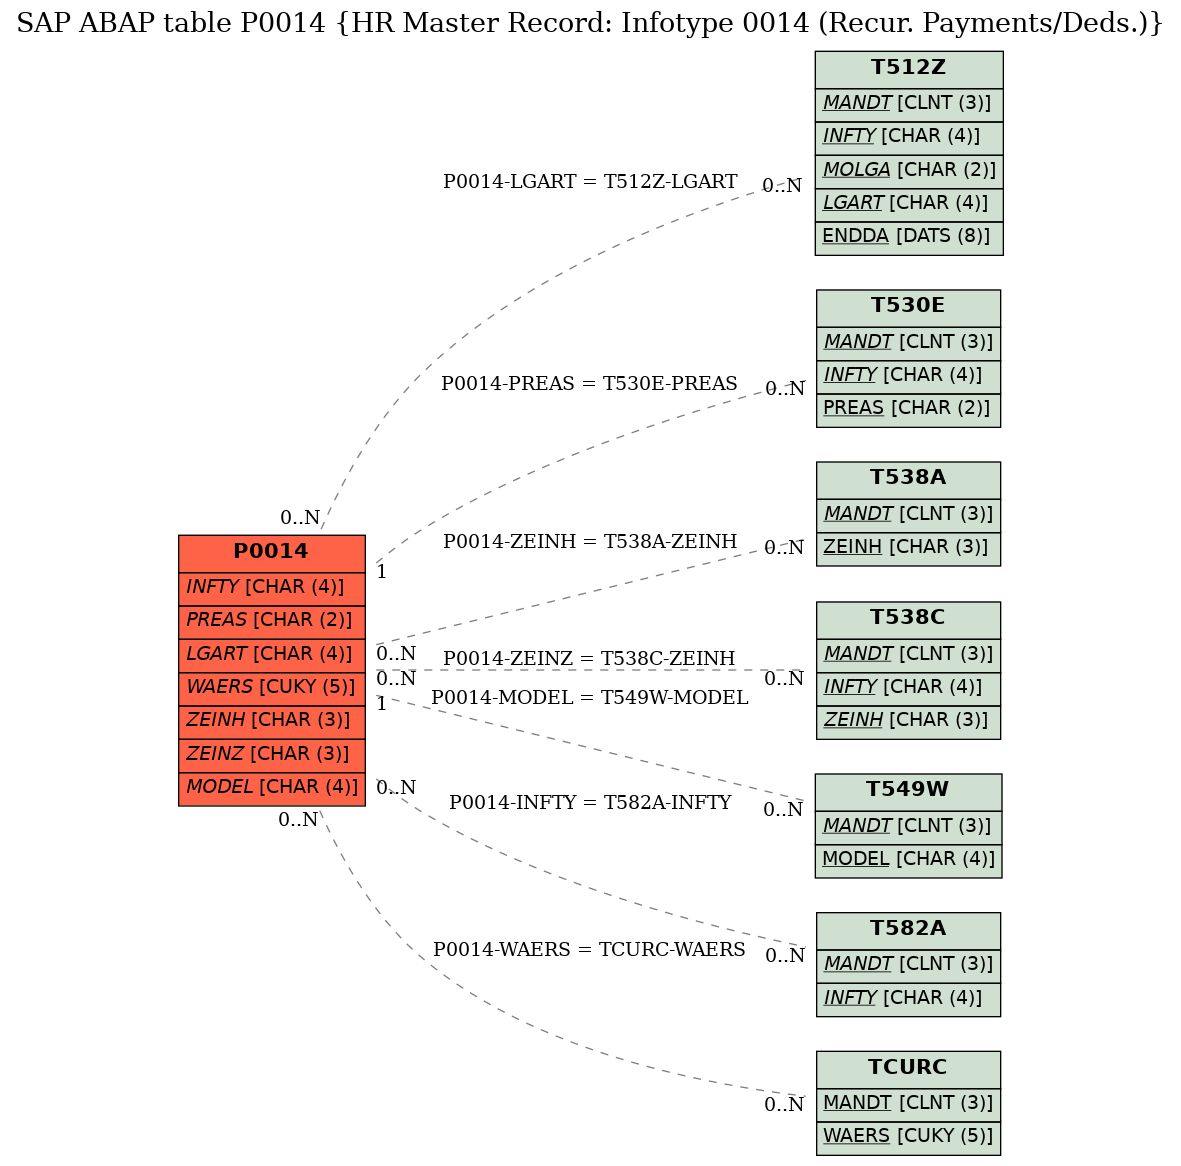 E-R Diagram for table P0014 (HR Master Record: Infotype 0014 (Recur. Payments/Deds.))